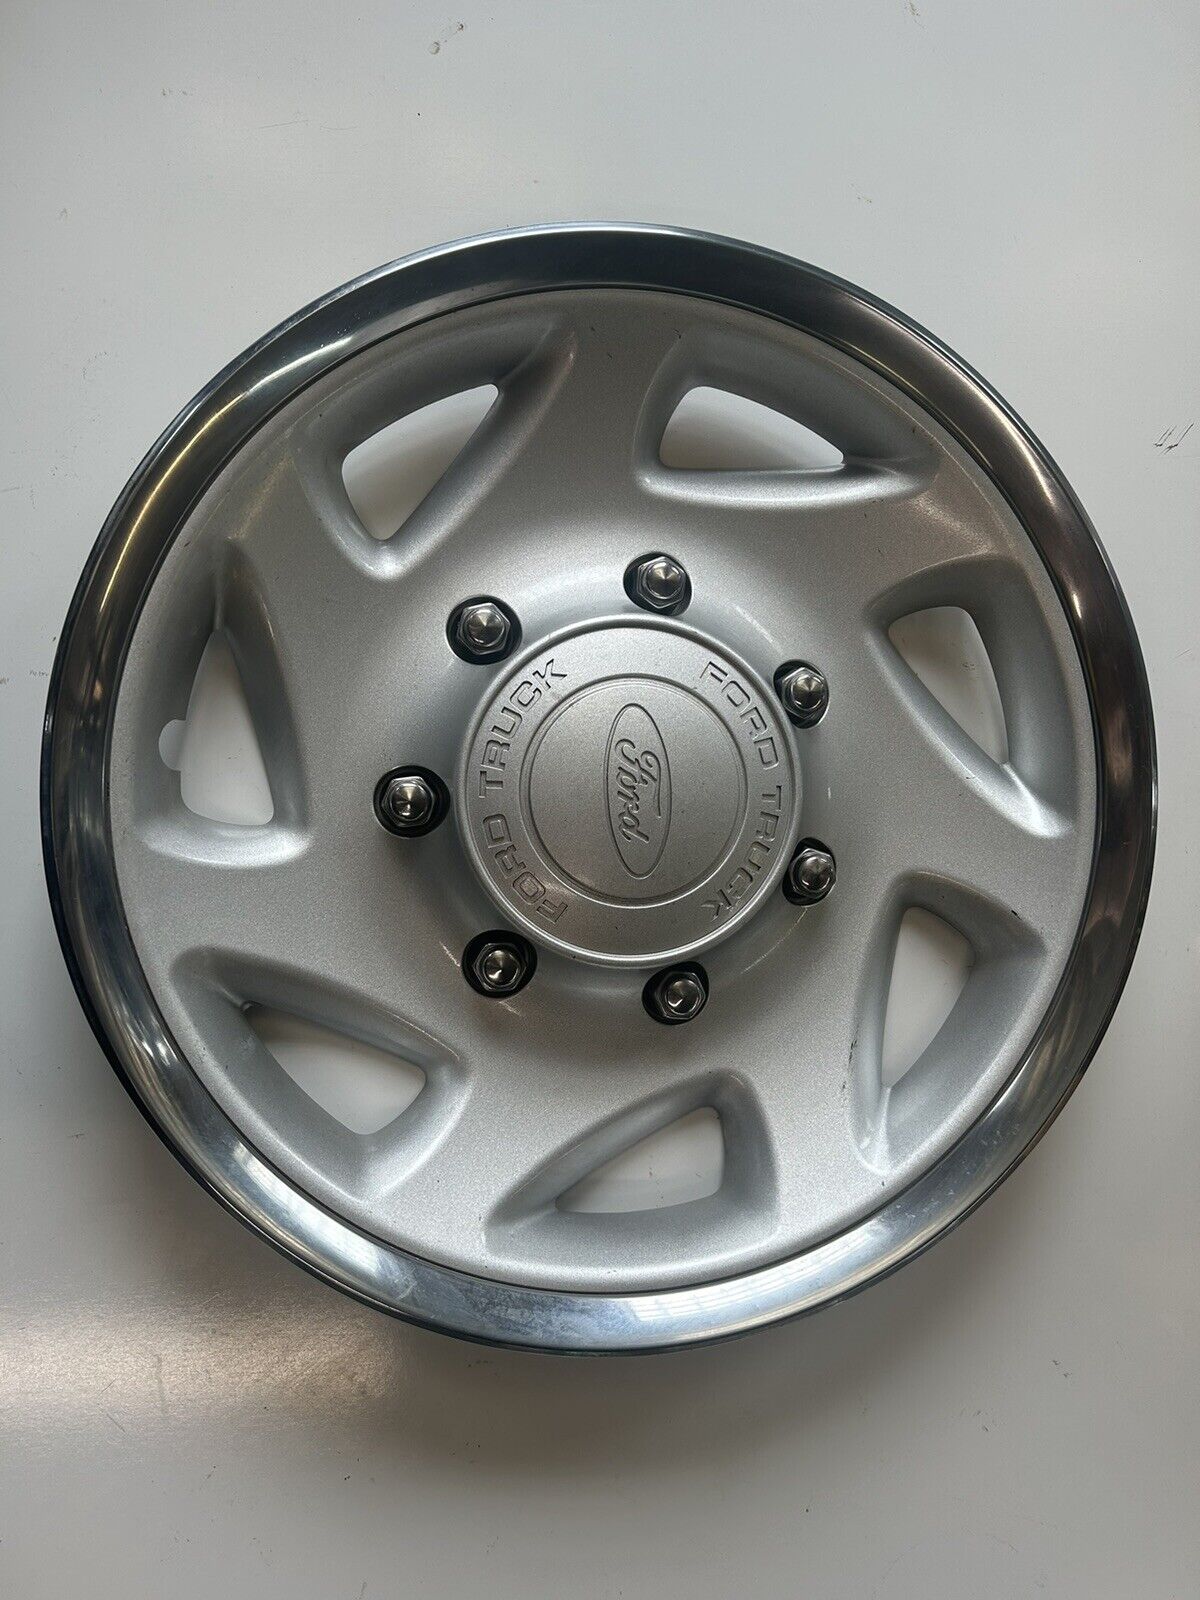 Ford F250 Hubcap Wheel Cover For 16 INCH f81a-1130-aa. Factory Original 7021